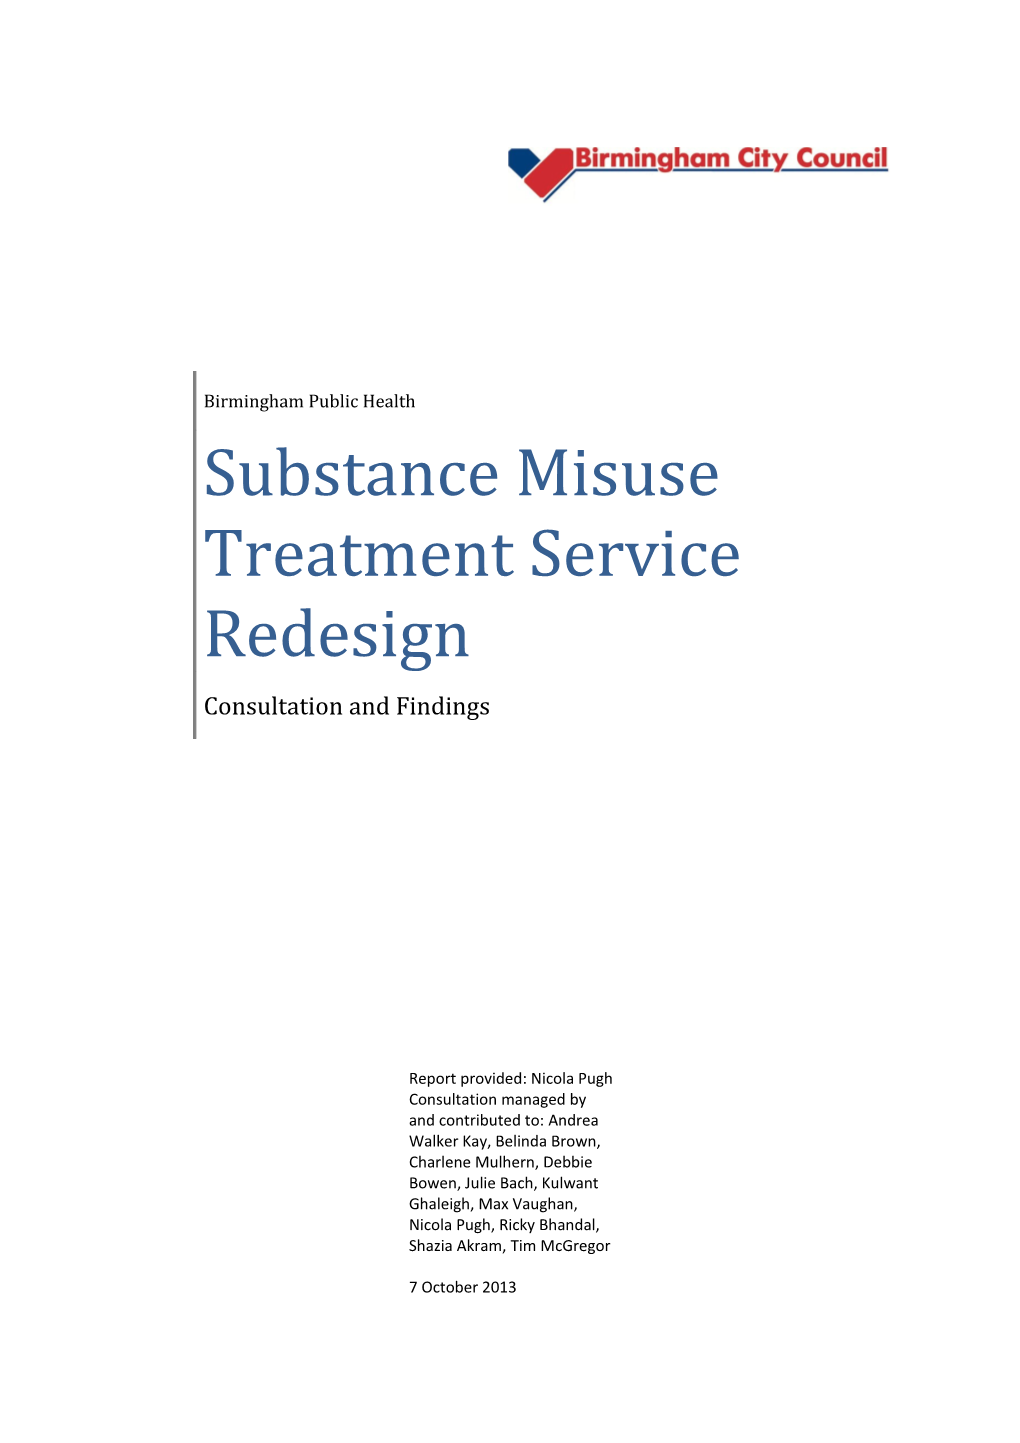 Substance Misuse Treatment Service Redesign